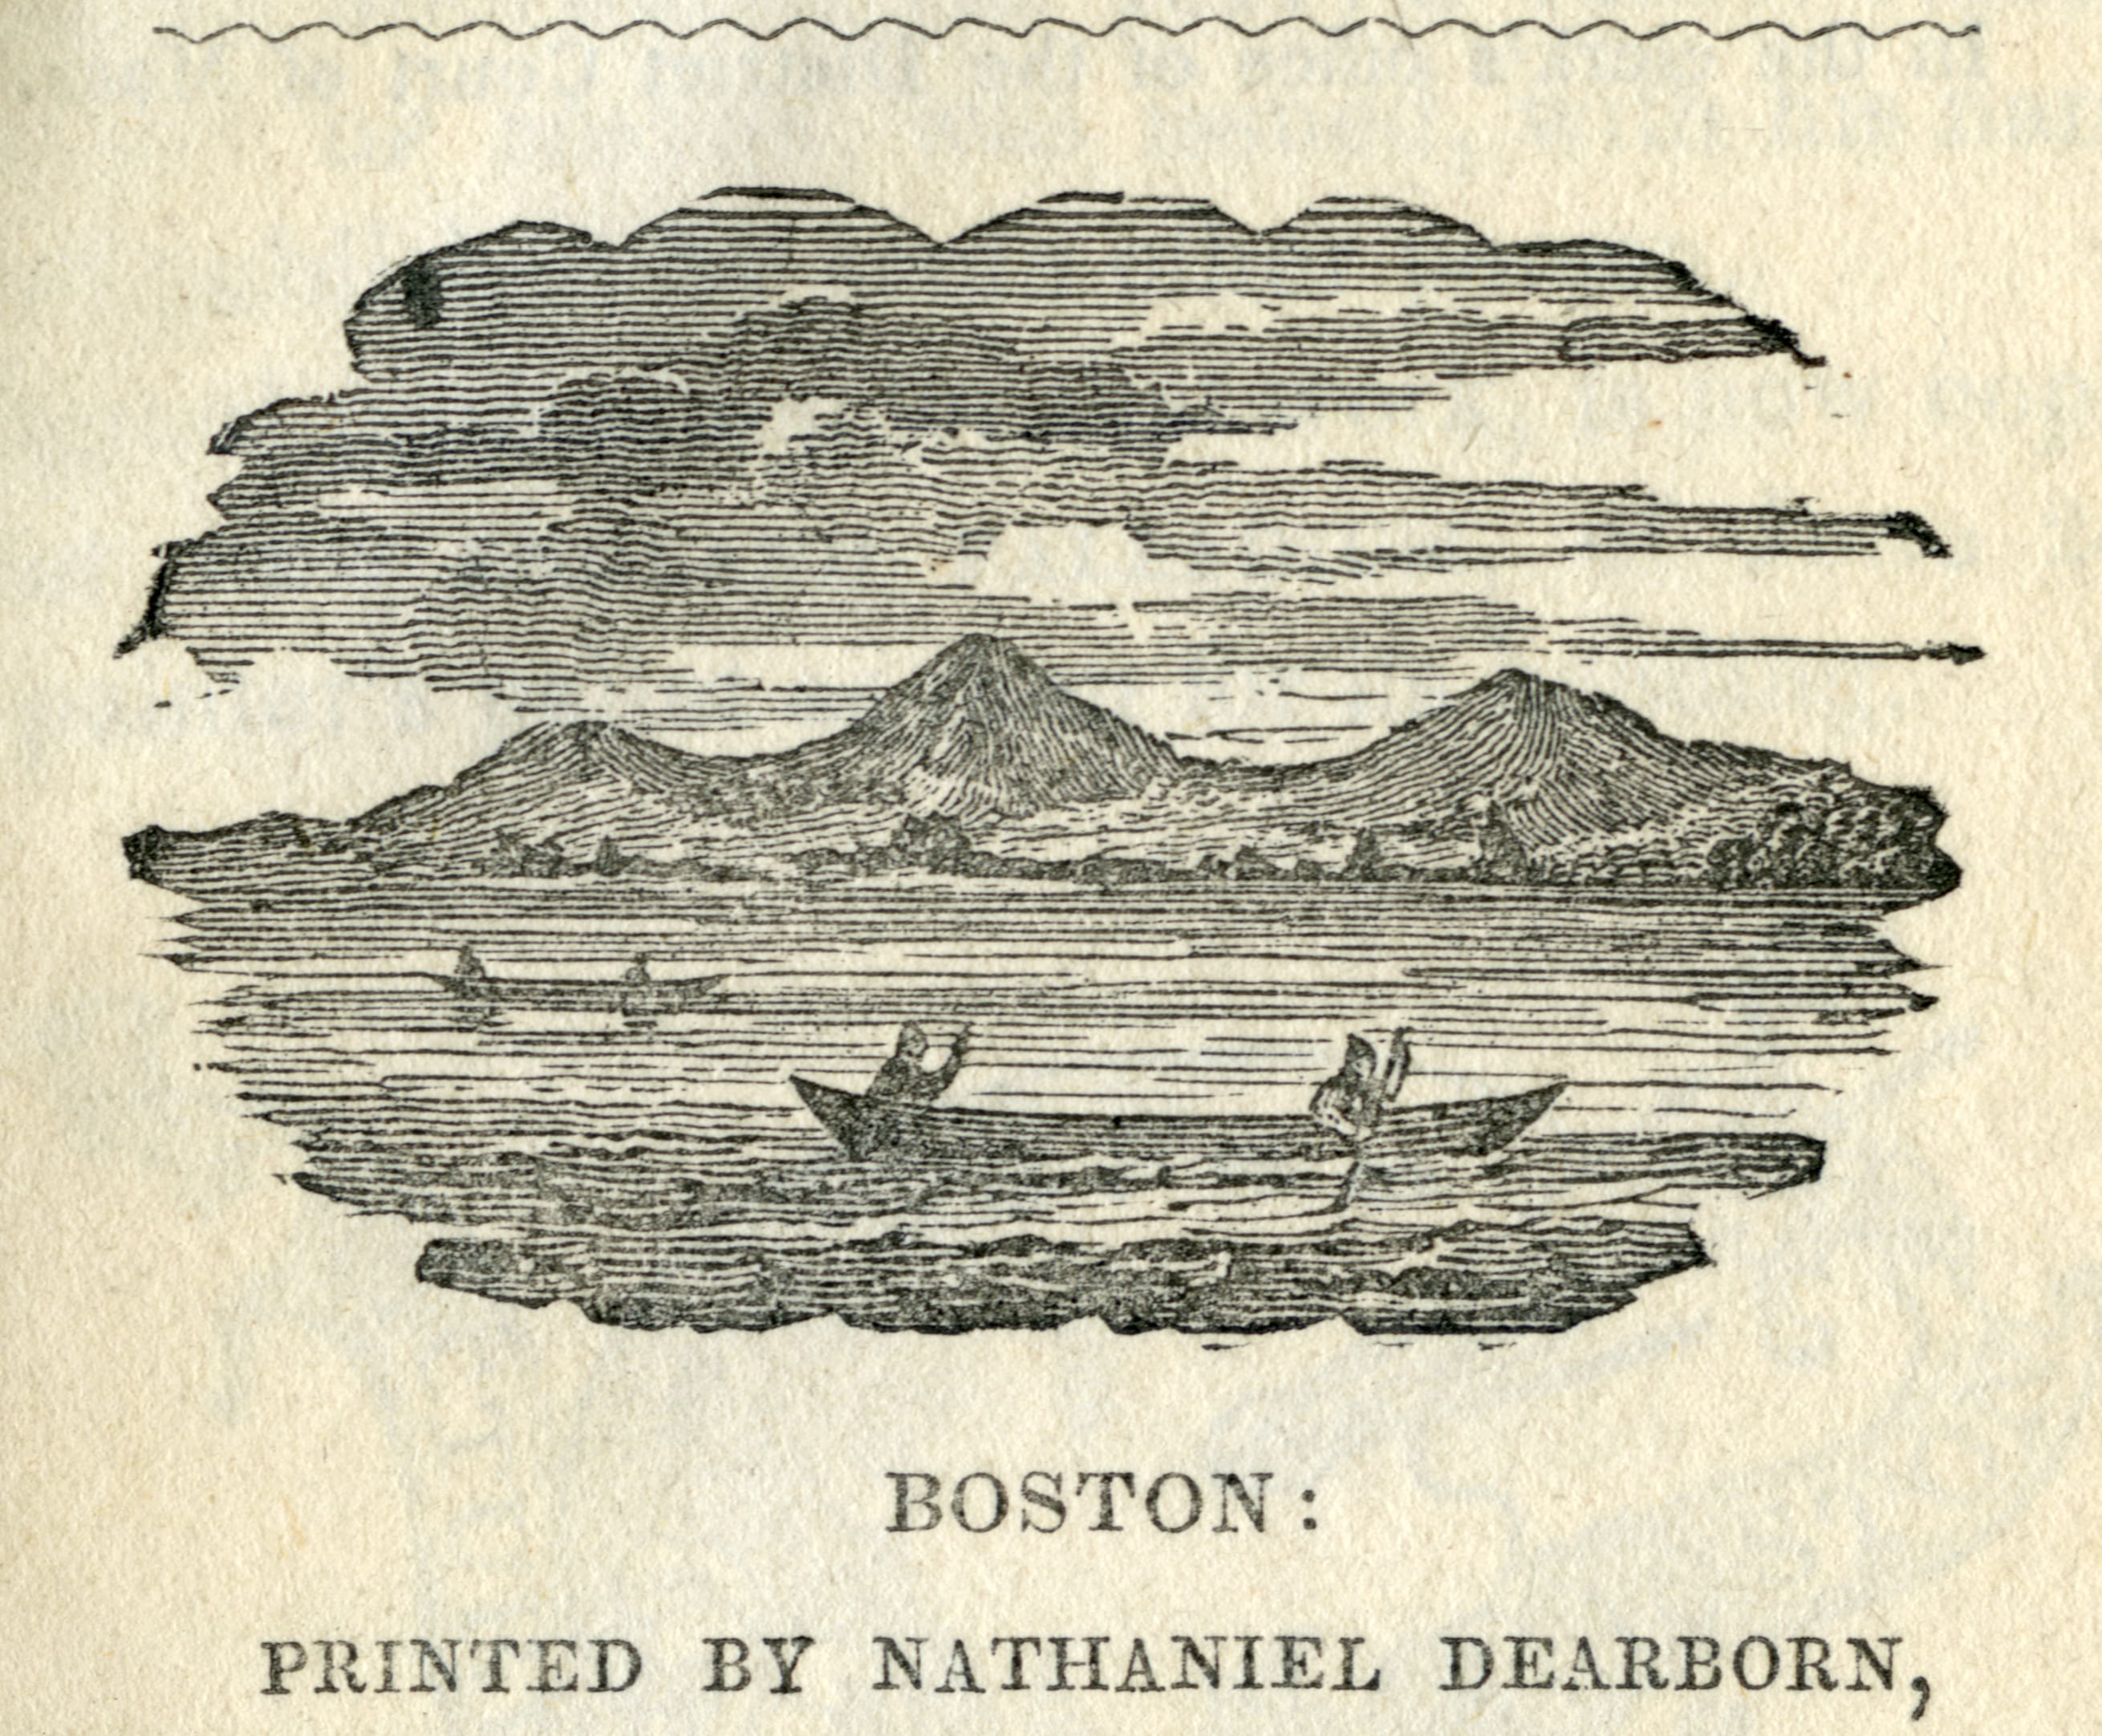 Image of Boston Notions, Detail from from title page